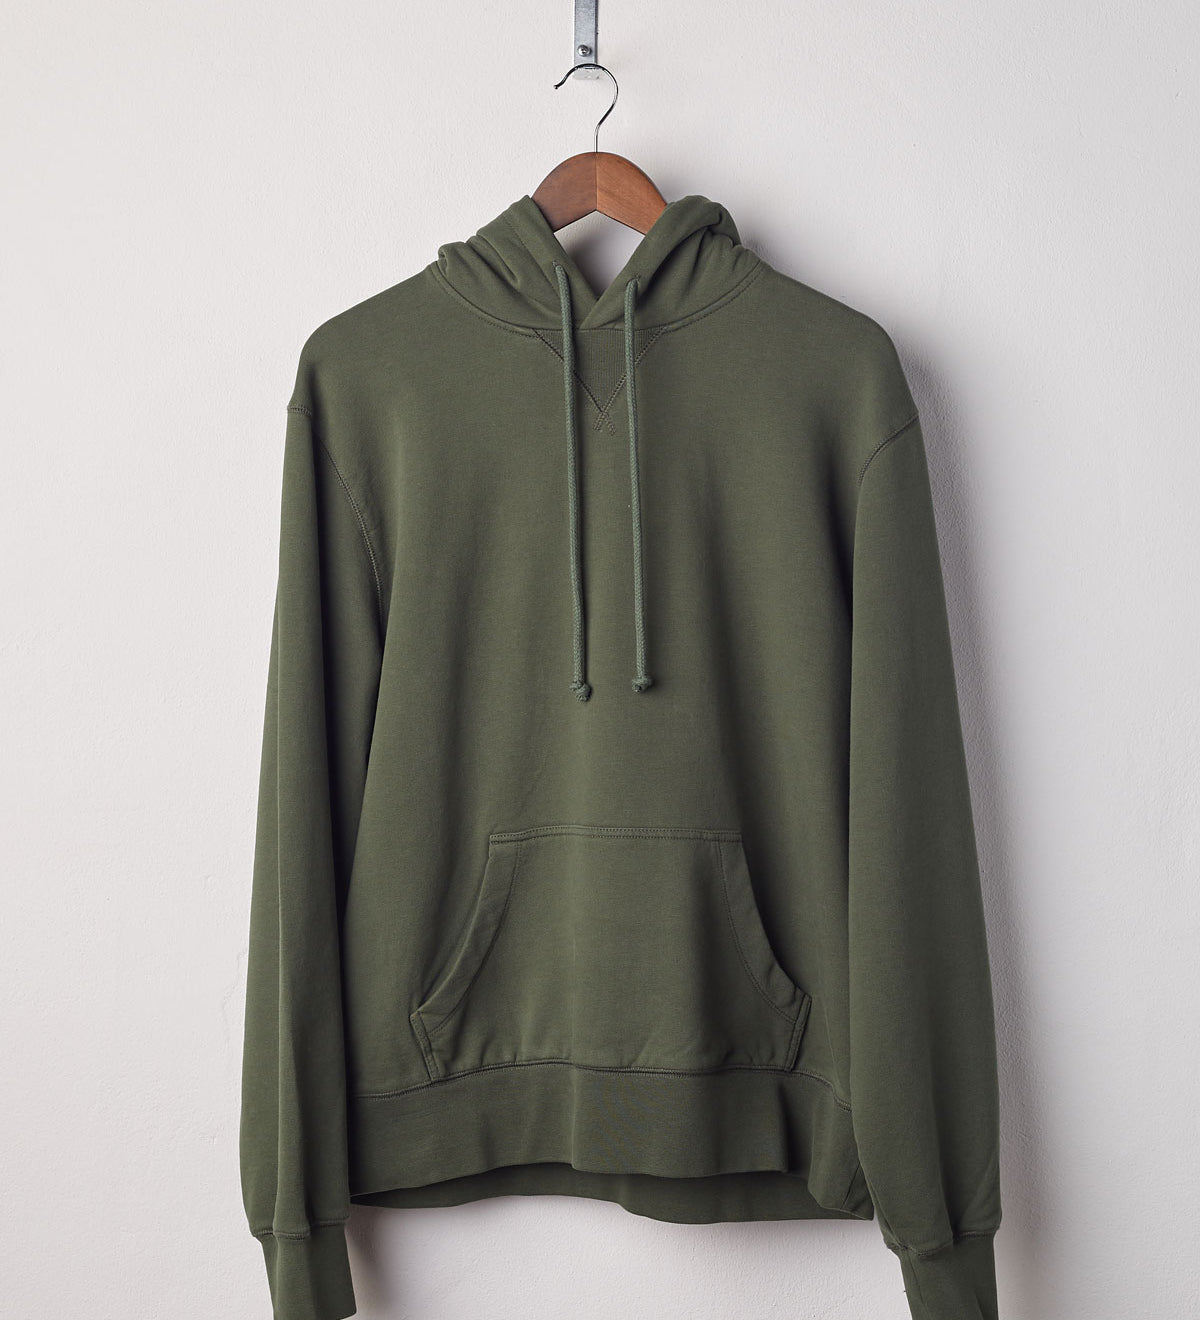 Front view of vine green organic heavyweight cotton #7004 jersey hooded sweater by Uskees presented on hanger.